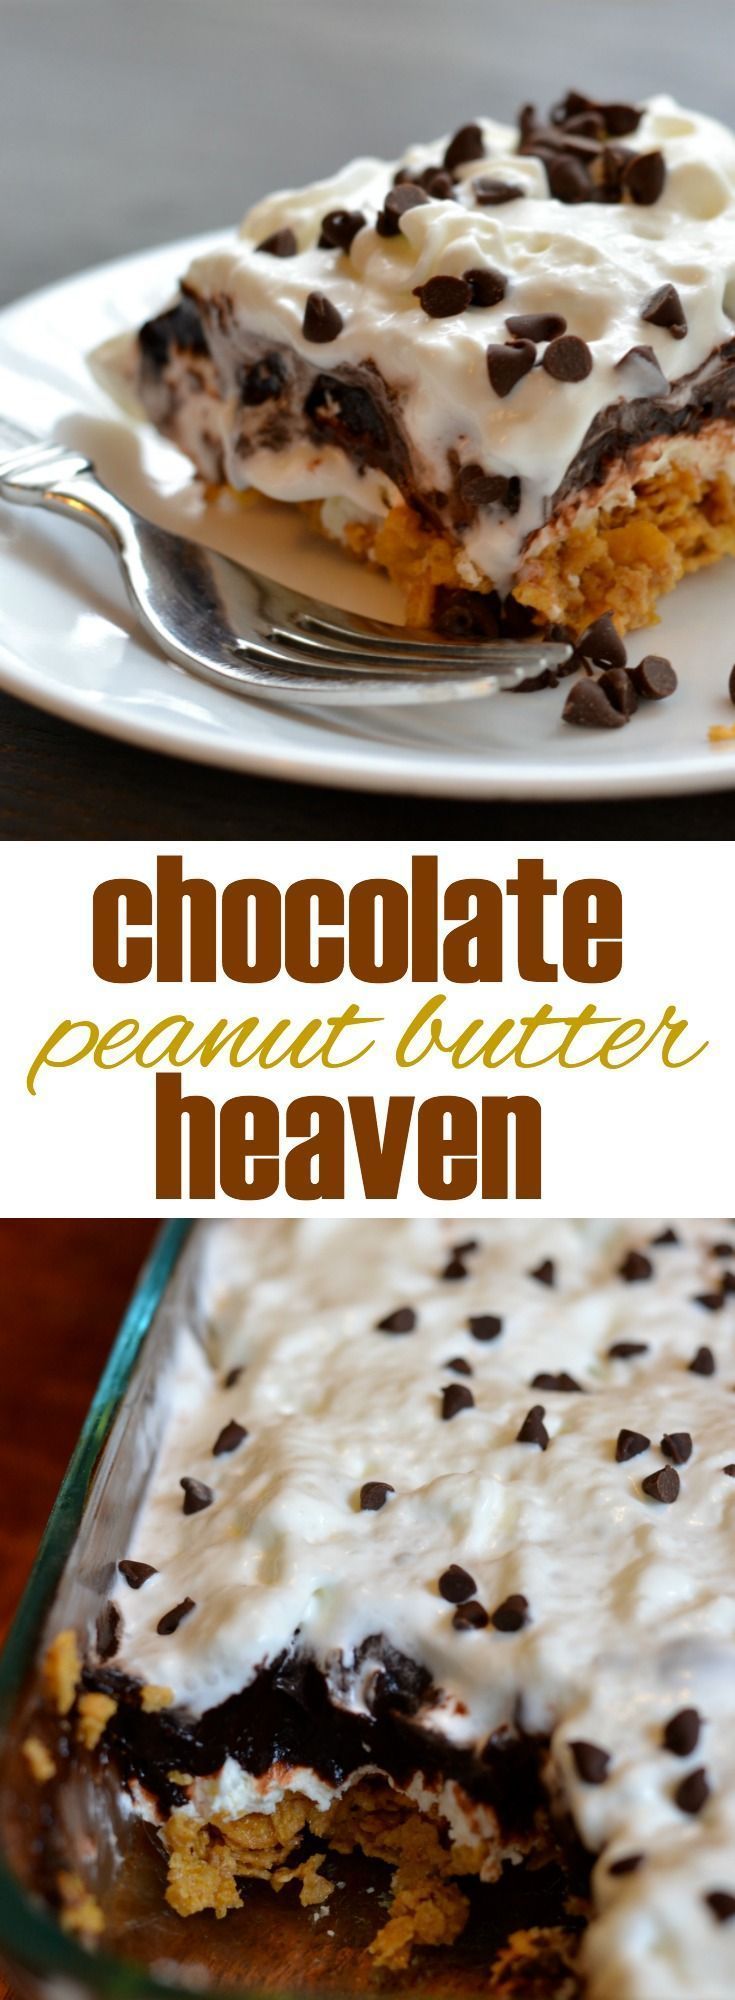 This easy, no bake dessert truly tastes like heaven. Layers of peanut butter “crunch,” sweetened cream cheese, and dark chocolate